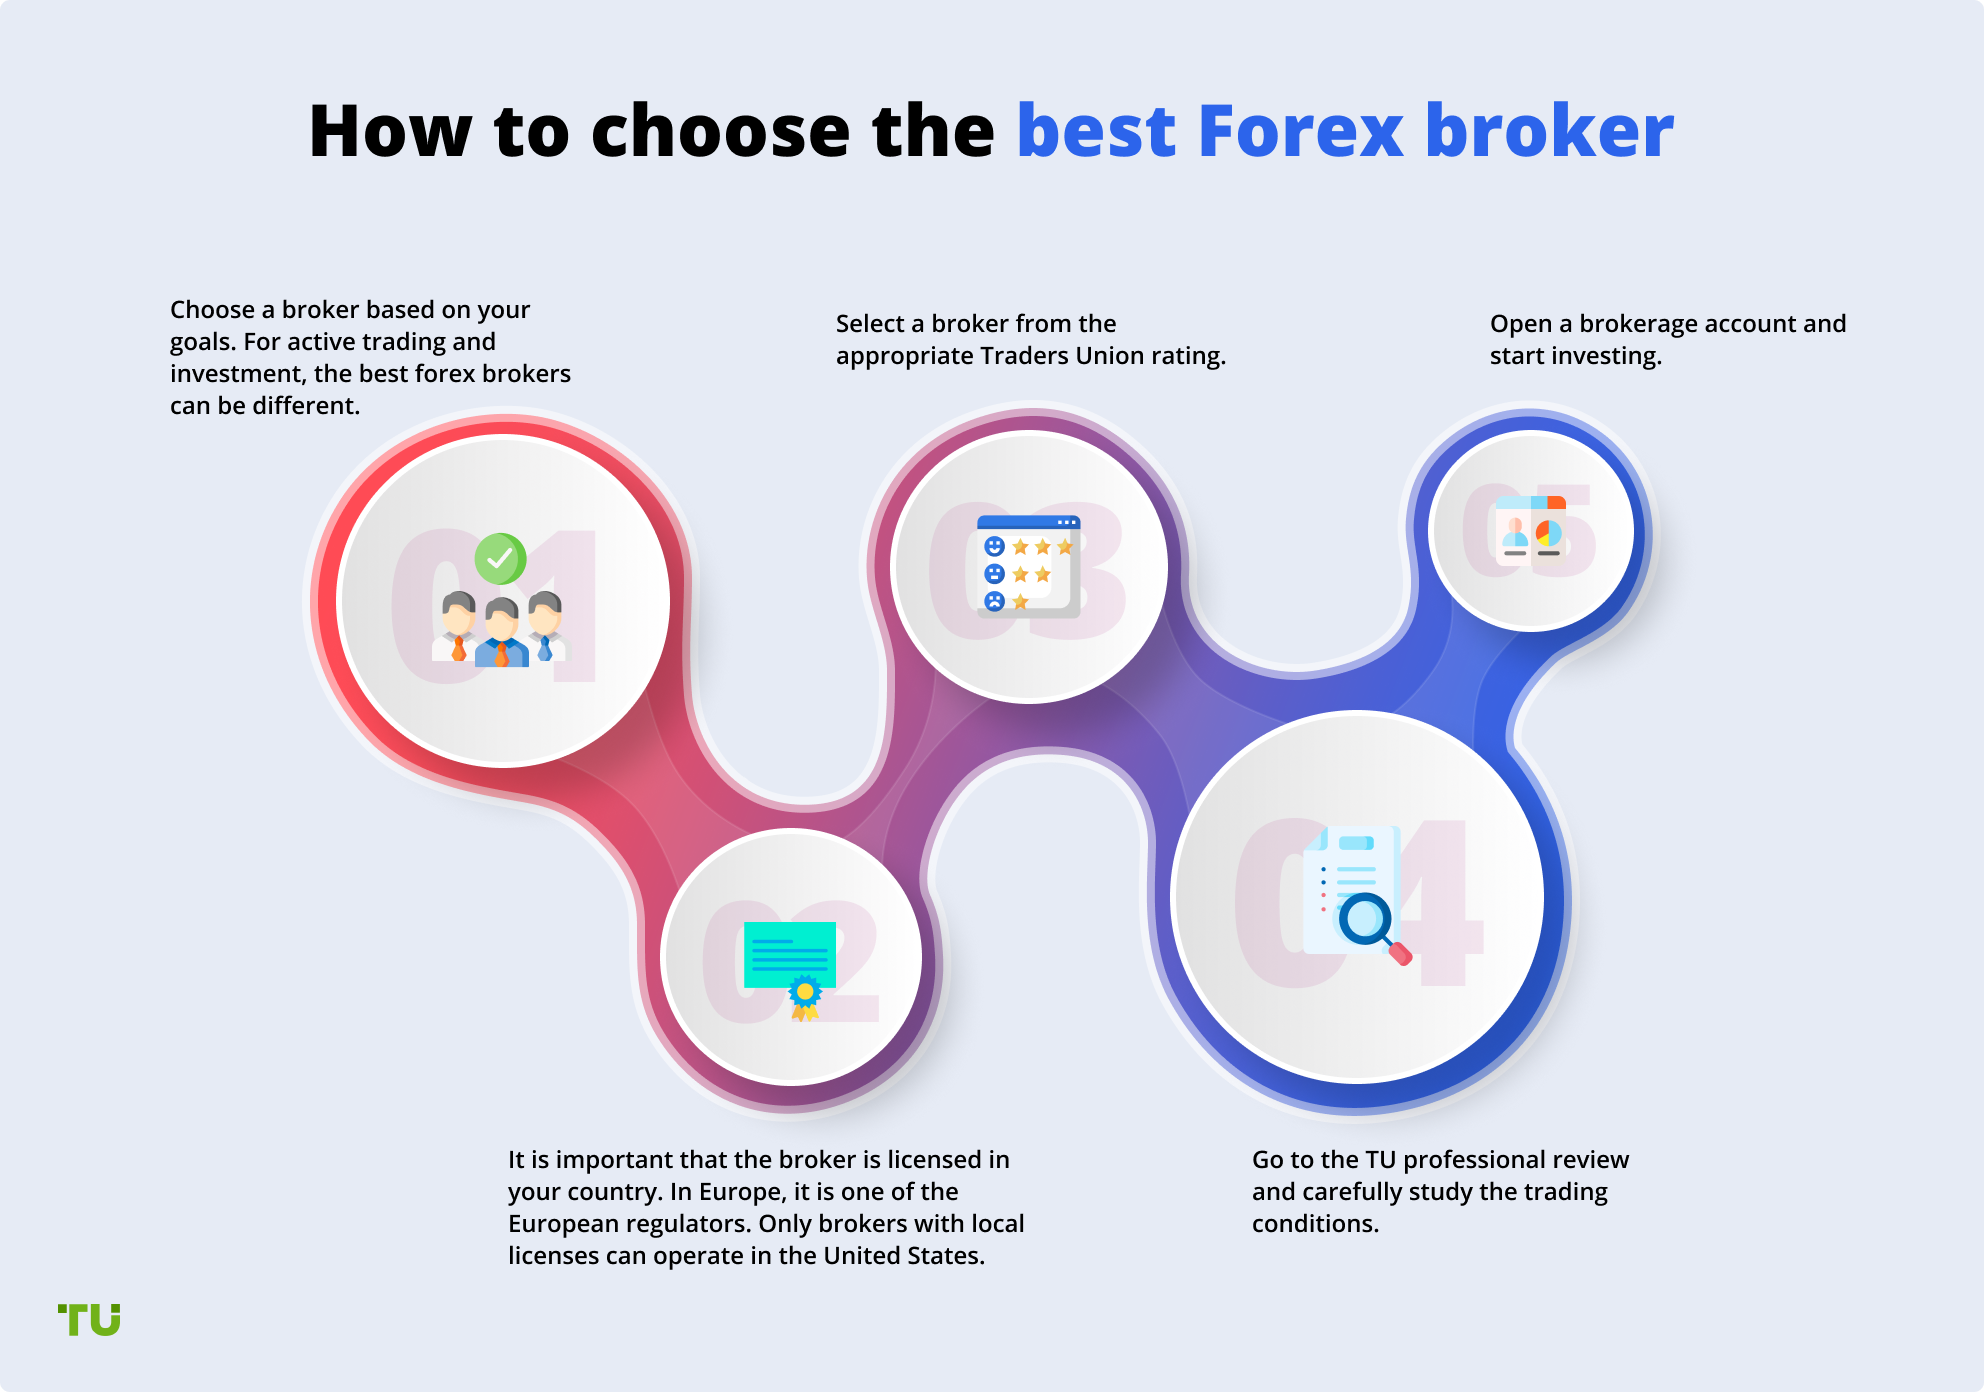 Forex brokers independent reviews about forex practical classes